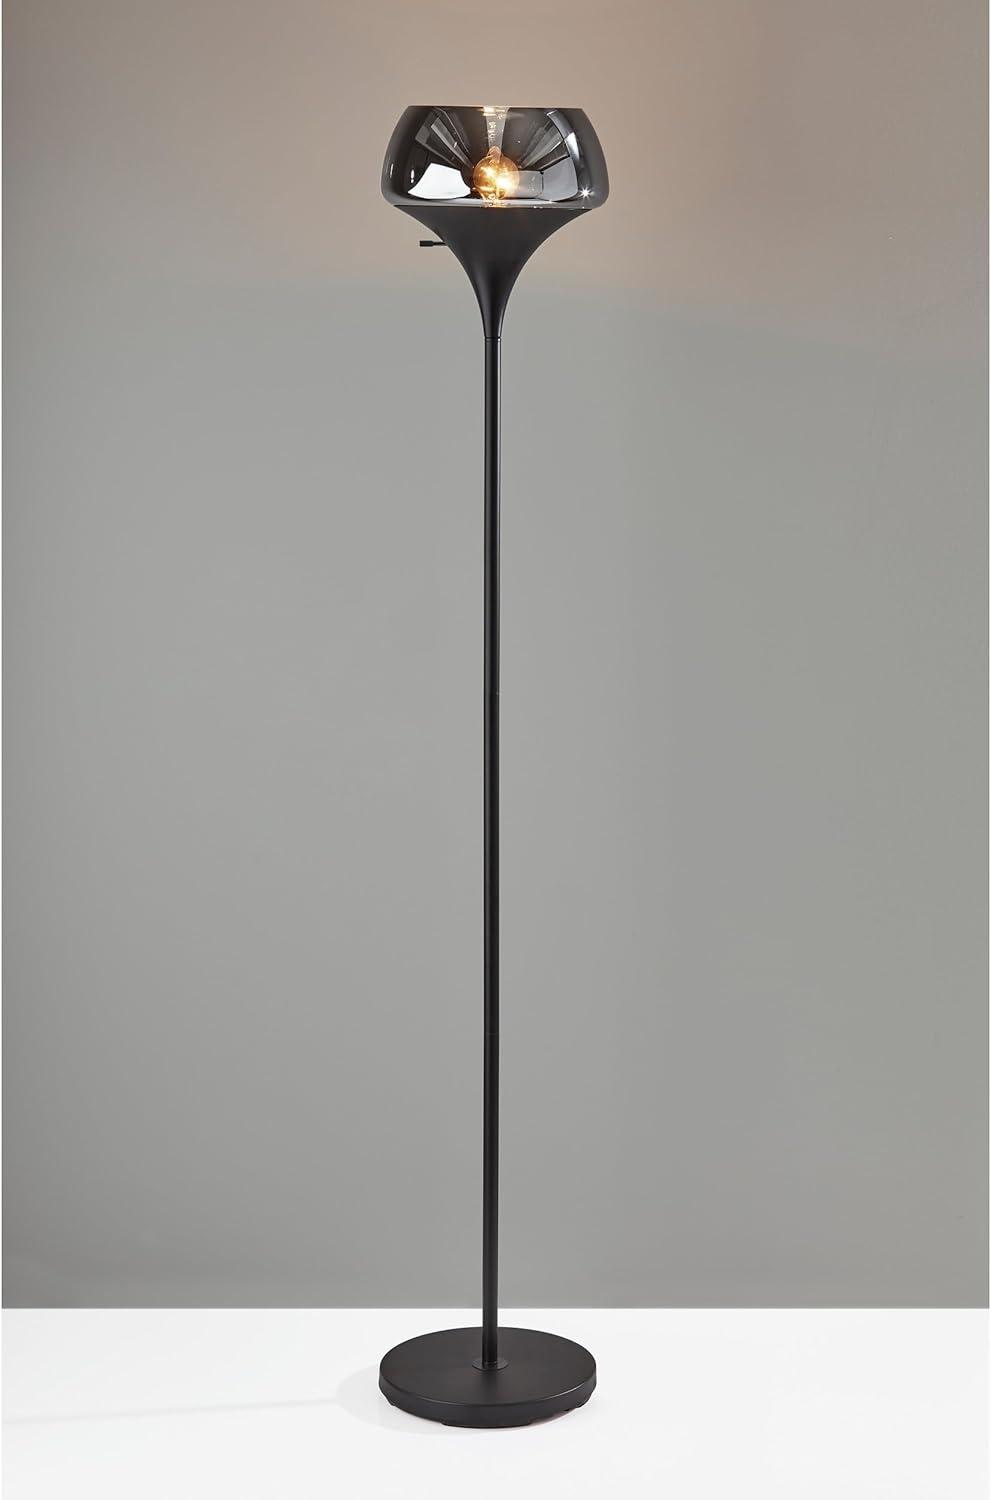 Eliza 69.5'' Black Metal Torchiere with Smoked Mercury Glass Shade